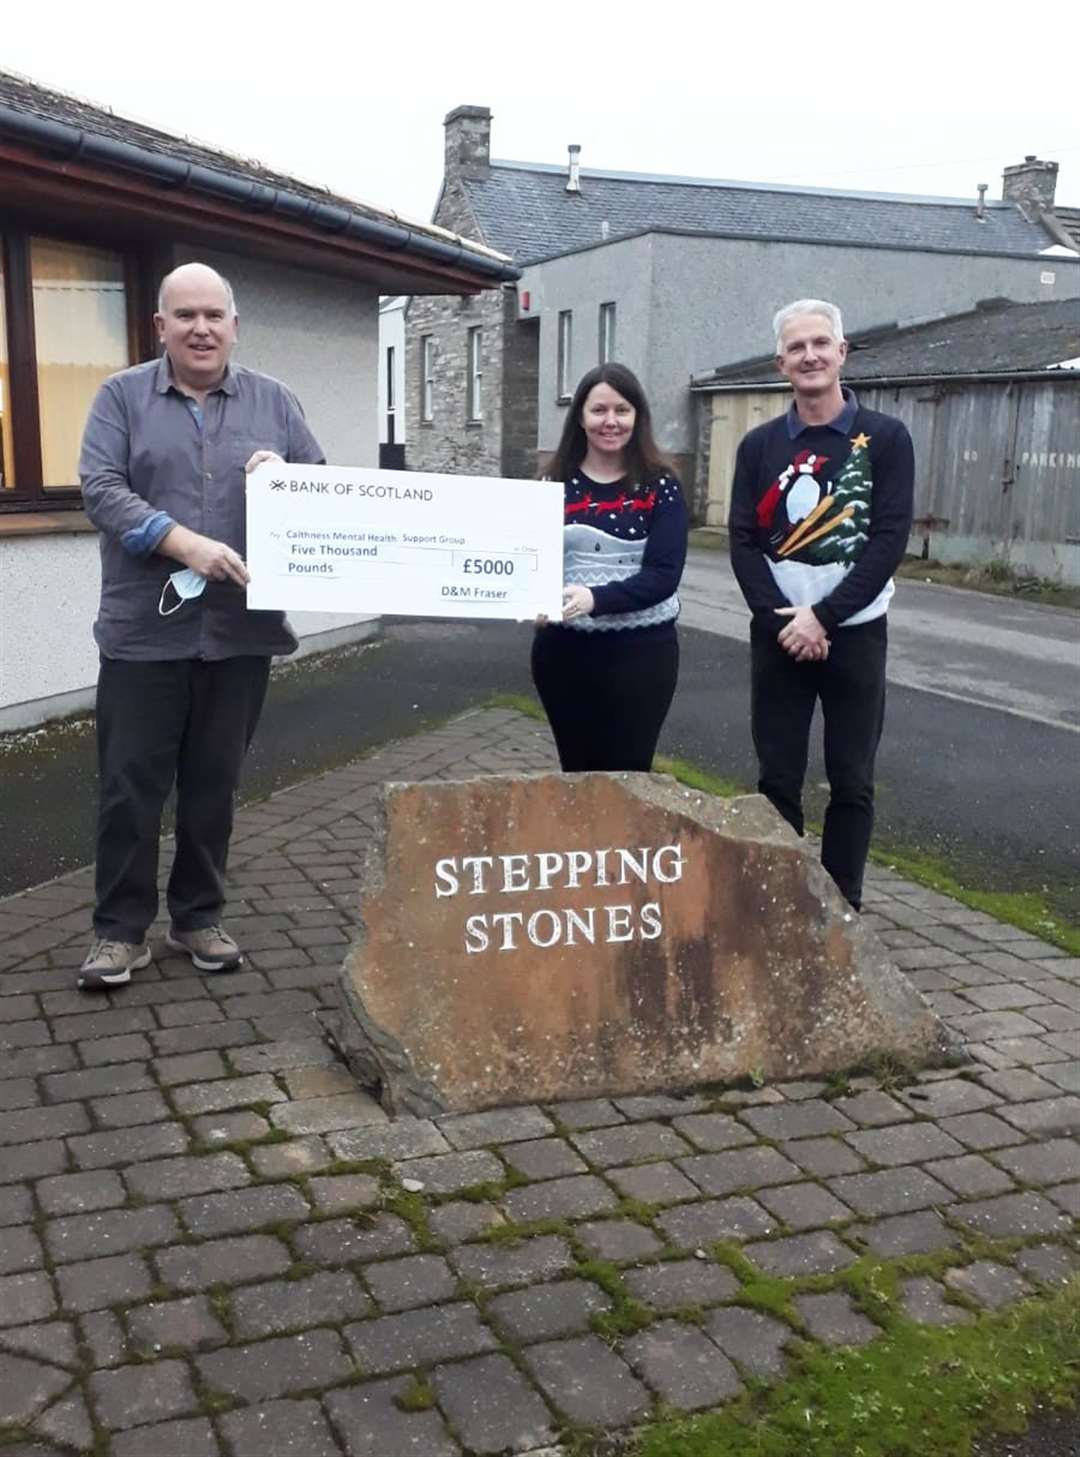 D&M Fraser director Lesley Mill and manager Scott Macdonald (right) handing the £5000 cheque to Chris Mackenzie of Caithness Mental Health Support Group.